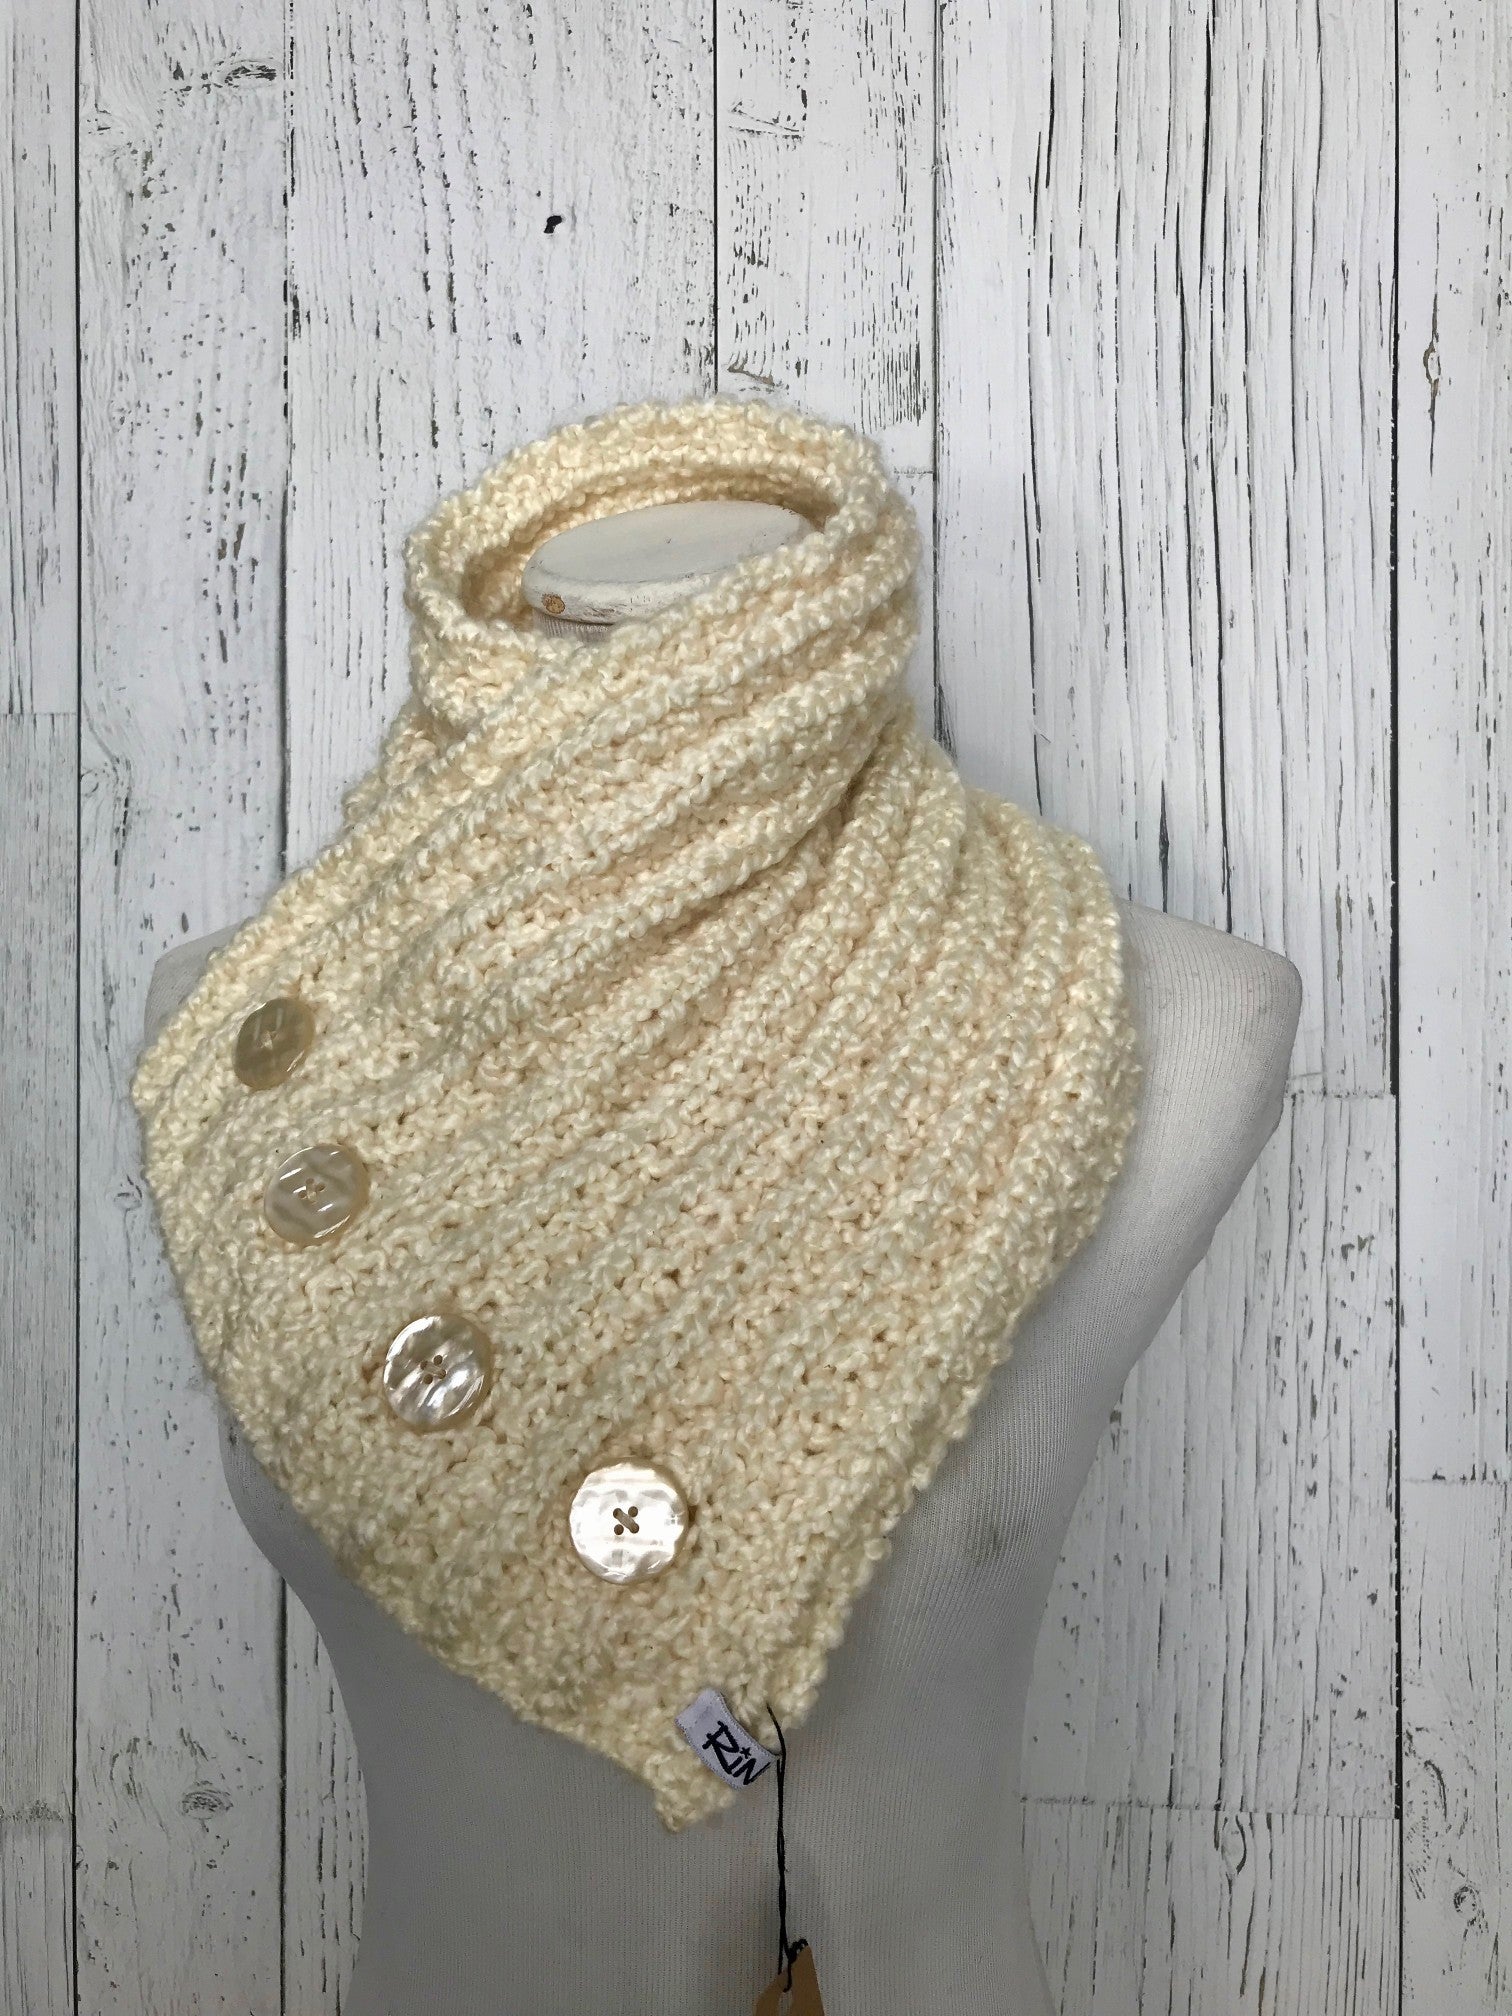 Classic Knit Button Cowl in Cream with shell buttons